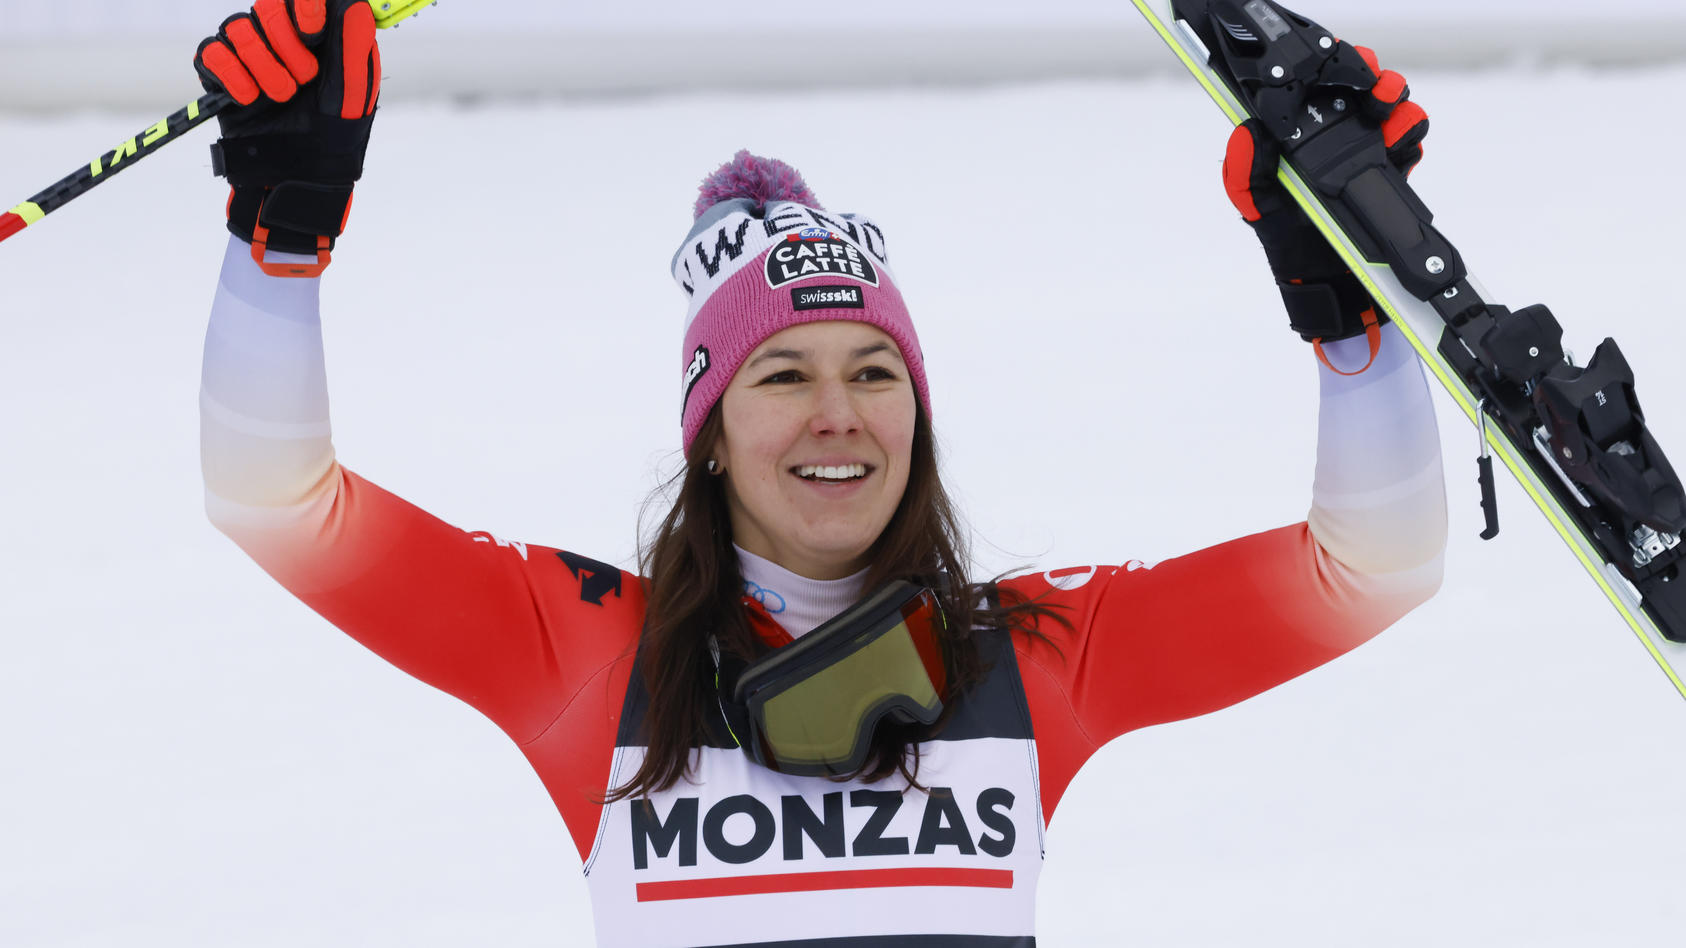 SPINDLERUV MLYN, CZECH REPUBLIC - JANUARY 28: Wendy Holdener of Team Switzerland takes 3rd place during the Audi FIS Alpine Ski World Cup Women's  Slalom on January 28, 2023 in Spindleruv Mlyn, Czech Republic. (Photo by Christophe Pallot/Agence Zoom/